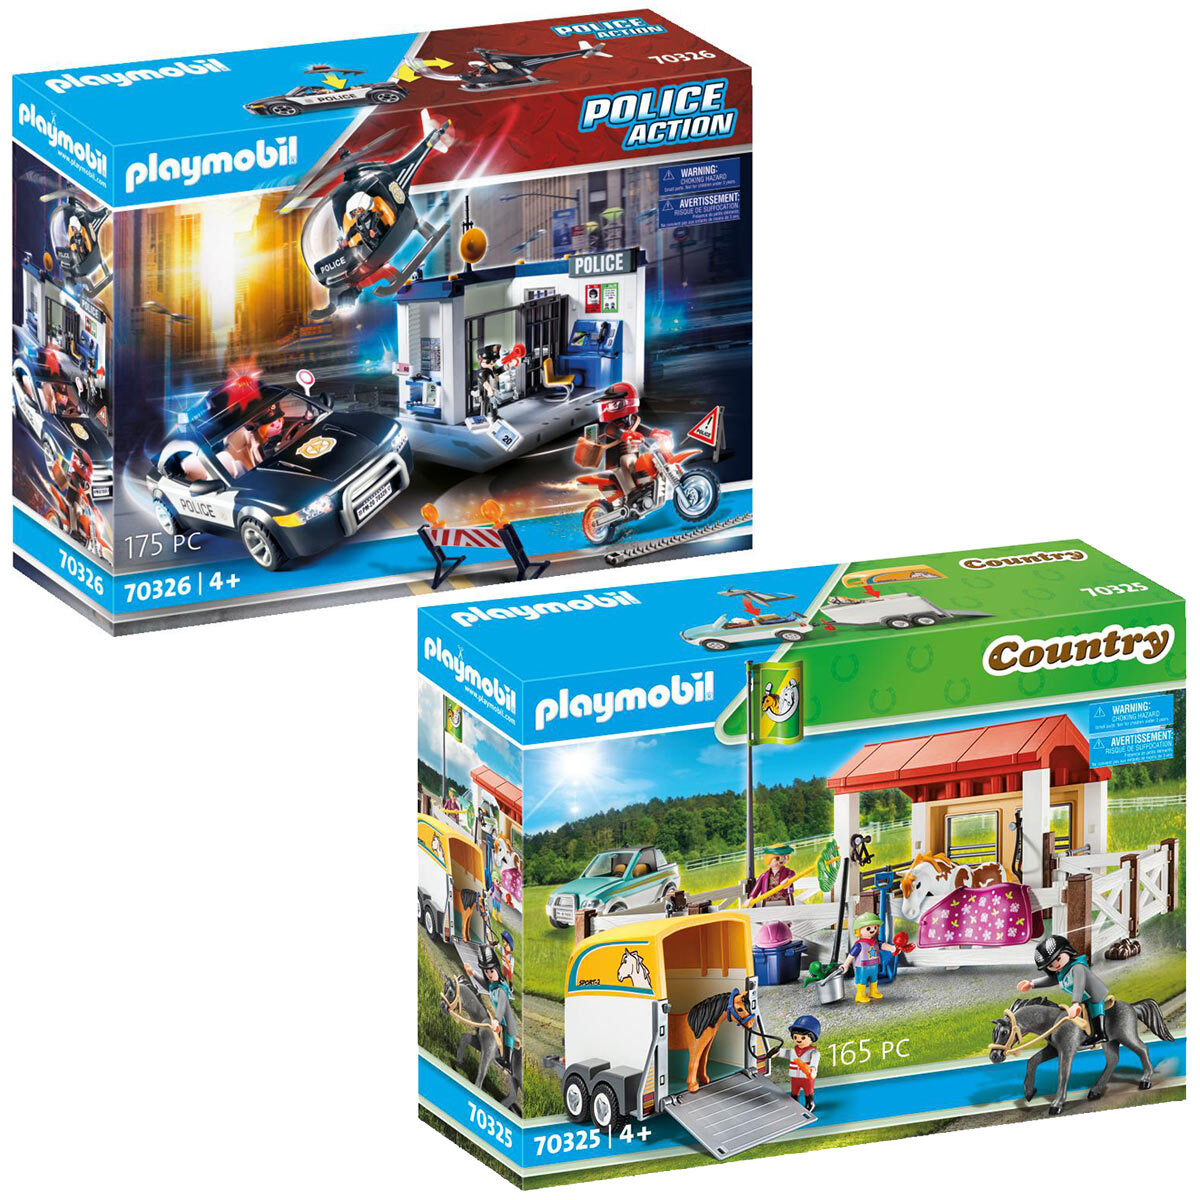 Playmobil Country Farm Or Police Action Station Play Set (4+ Years)